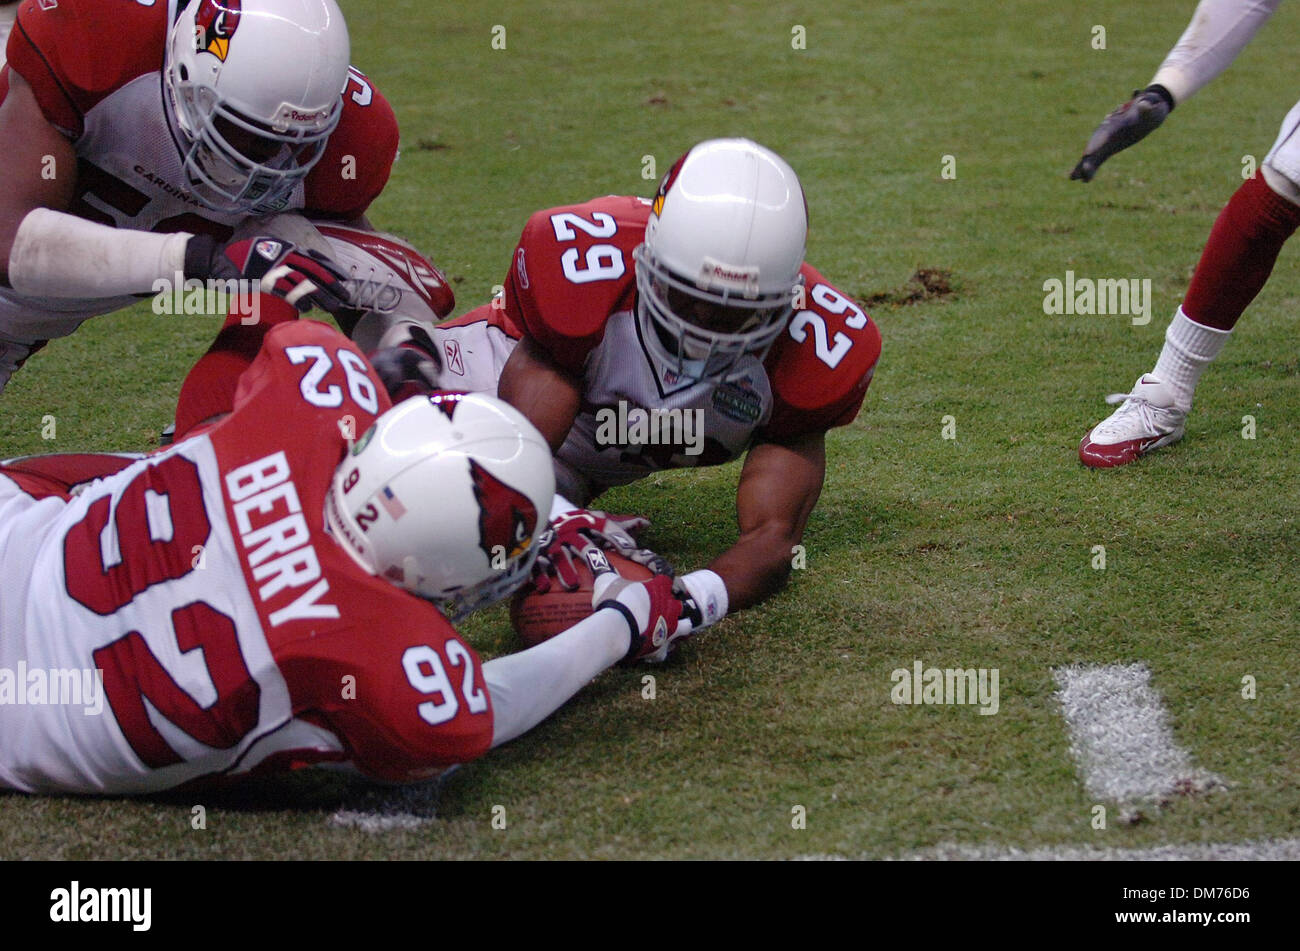 Oct 02, 2005; Mexico City, MEXICO; NFL FOOTBALL: Cardinals #29 Quentin Harris Bertrand Berry struggle for a ball fumbled by Frank Gore in the 4th quarter in Sunday evenings 31-14 Arizona Cardinal win over the San Francisco 49ers at Estadio Azteca in Mexico City. Mandatory Credit: Photo by Jose Luis Villegas/Sacramento Bee/ZUMA Press. (©) Copyright 2005 by Jose Luis Villegas/Sacrame Stock Photo